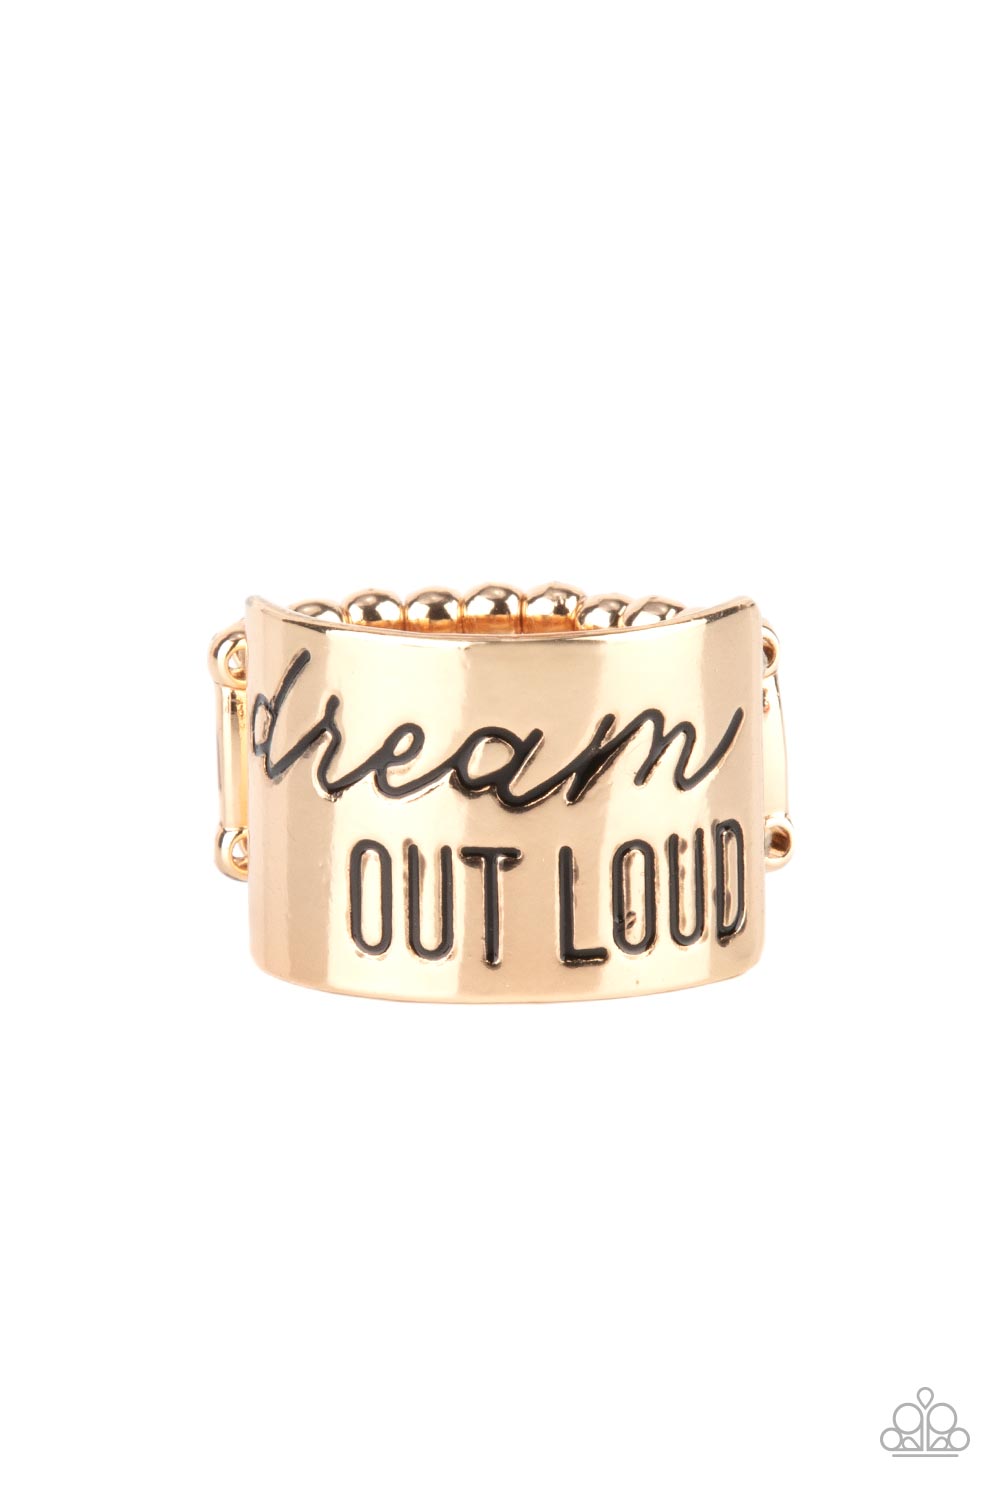 Dream Louder Gold Ring - Paparazzi Accessories- lightbox - CarasShop.com - $5 Jewelry by Cara Jewels